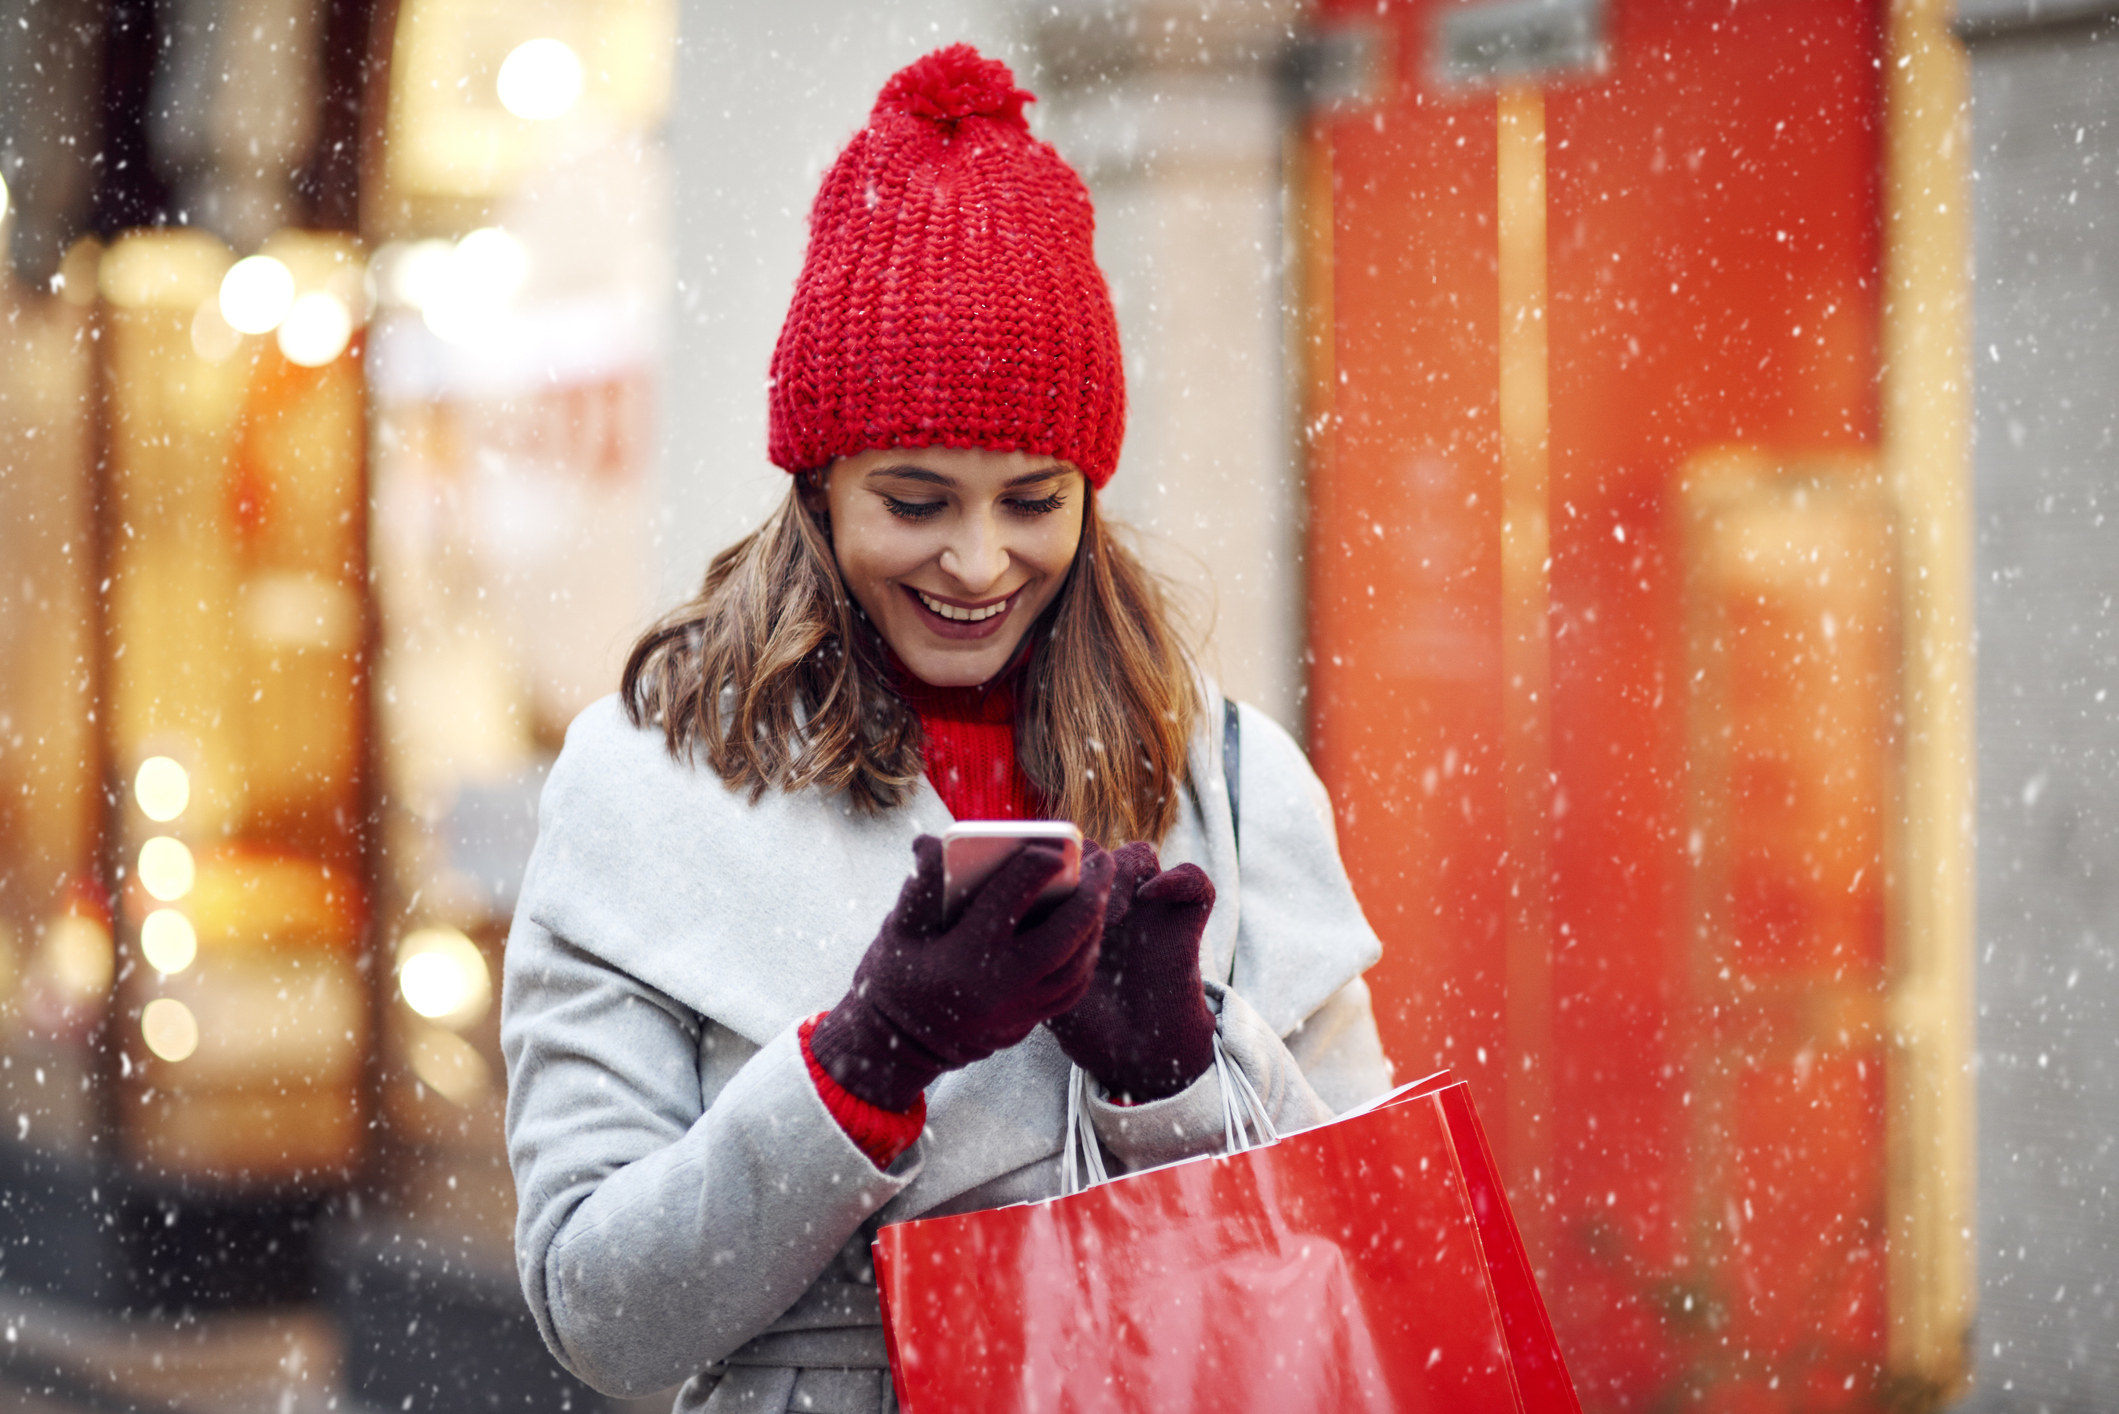 Woman smiling at her phone while shopping in winter